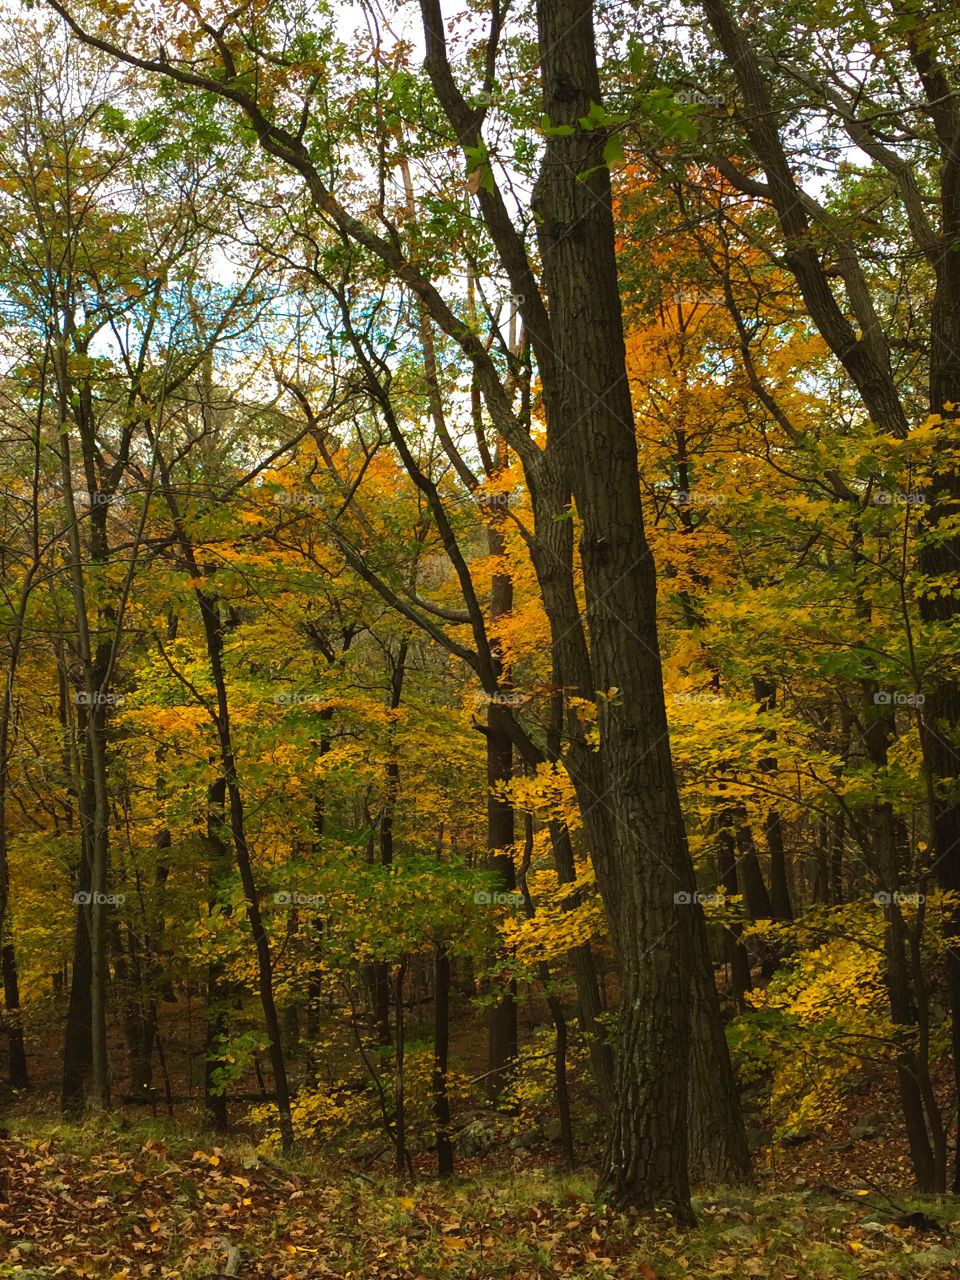 View of Autumn trees in forest